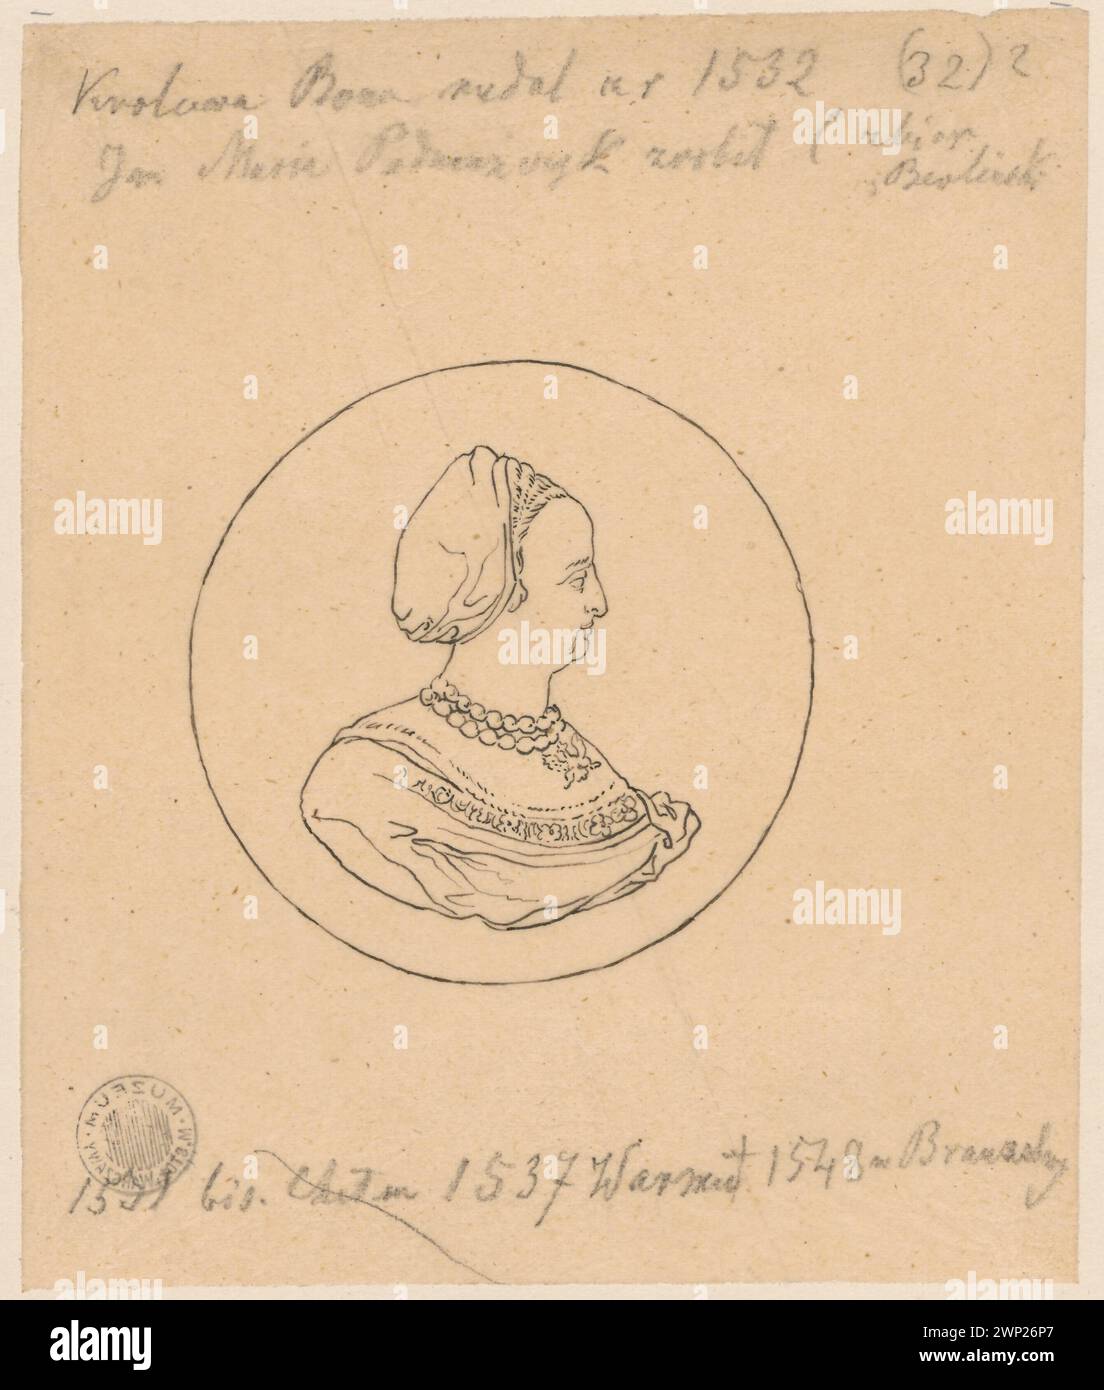 Portrait of Queen Bona Sforza from the profile, according to the medal by Jan Maria Padovano; Lesser, Aleksander (1814-1884), Mosca, Giovanni Maria (1493-Ca 1573); 1830-1884 (1830-00-00-1884-00-00);Bona (Queen of Poland - 1494-1557), Bona (Queen of Poland - 1494-1557) - iconography, Lesser, Aleksander (1814-1884), Lesser, Aleksander (1814-1884) - collections, Lesser, Wiktor Stanisław Zygmunt (Baron - Baron - 1853-1935), Lesser, Wiktor Stanisław Zygmunt (Baron - 1853-1935) - collection, 16th century, gift (provenance), queen, medals, medals (medalistics), lens, personalities, personalities, Pol Stock Photo